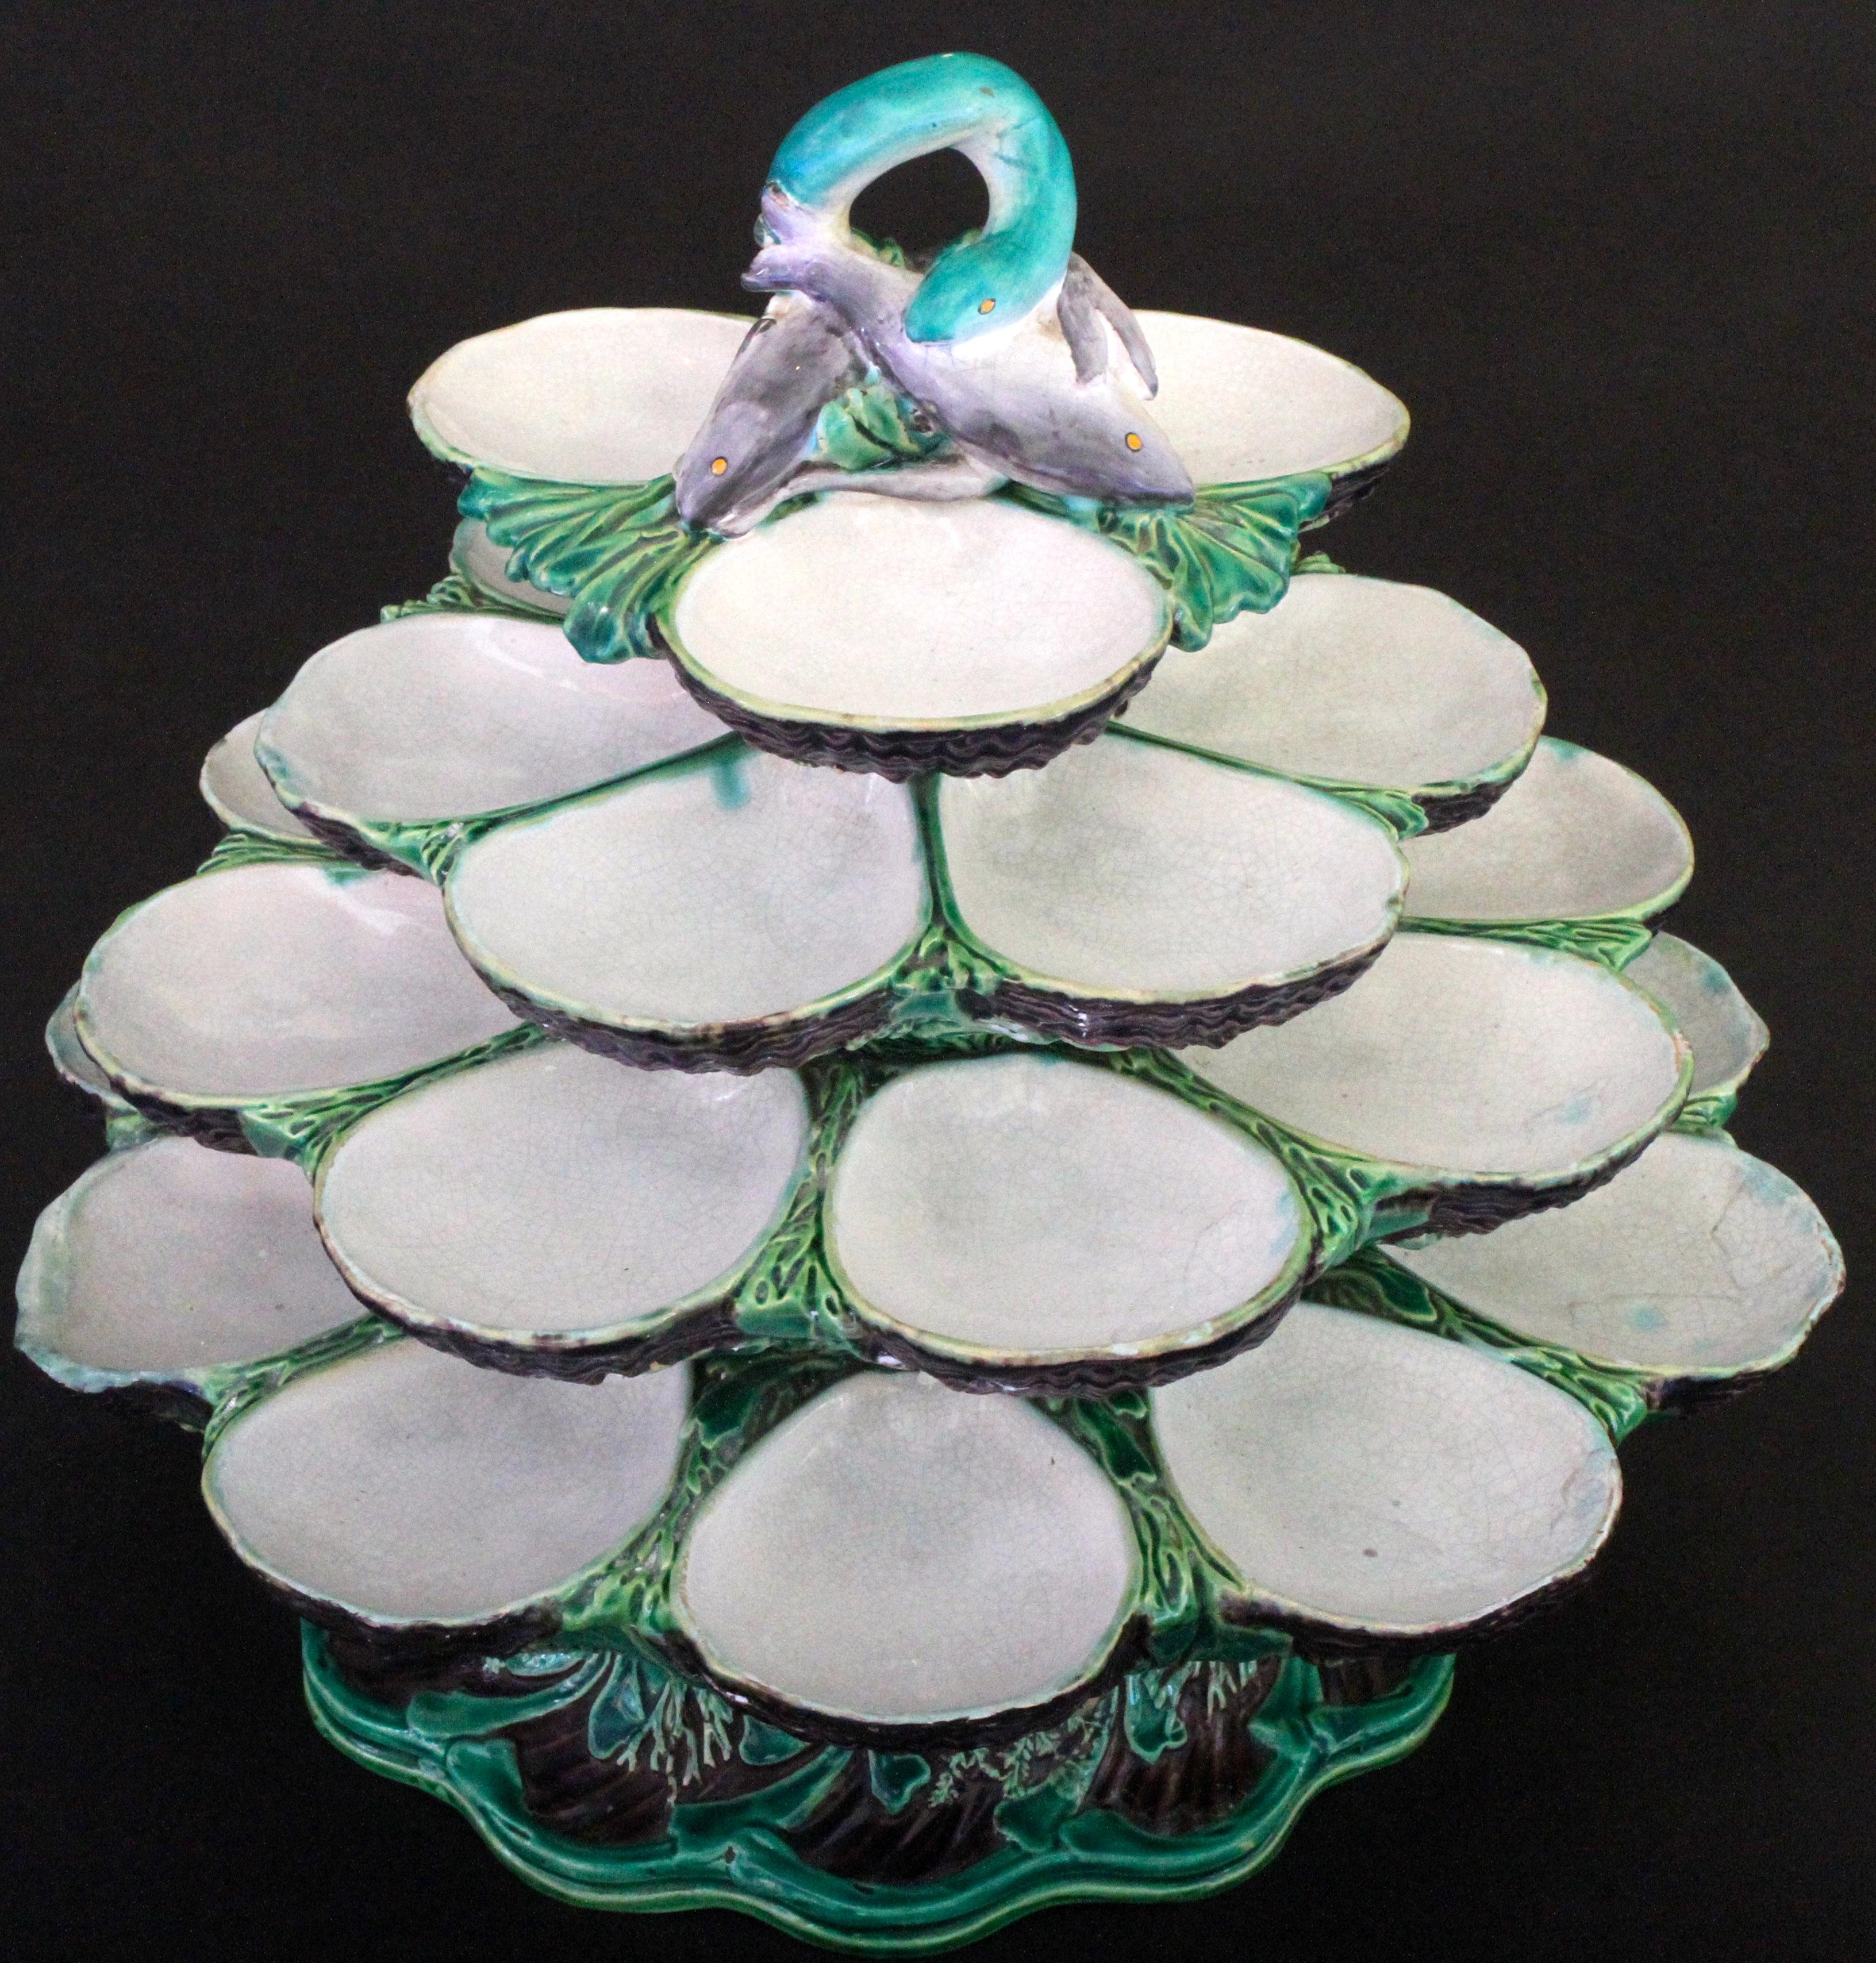 19th century Minton, Stoke-on-Trent, England hand-painted majolica 4-tier oyster server or stand - comes in two pieces, in perfect working order. This piece is beautifully painted: the body with varied green 